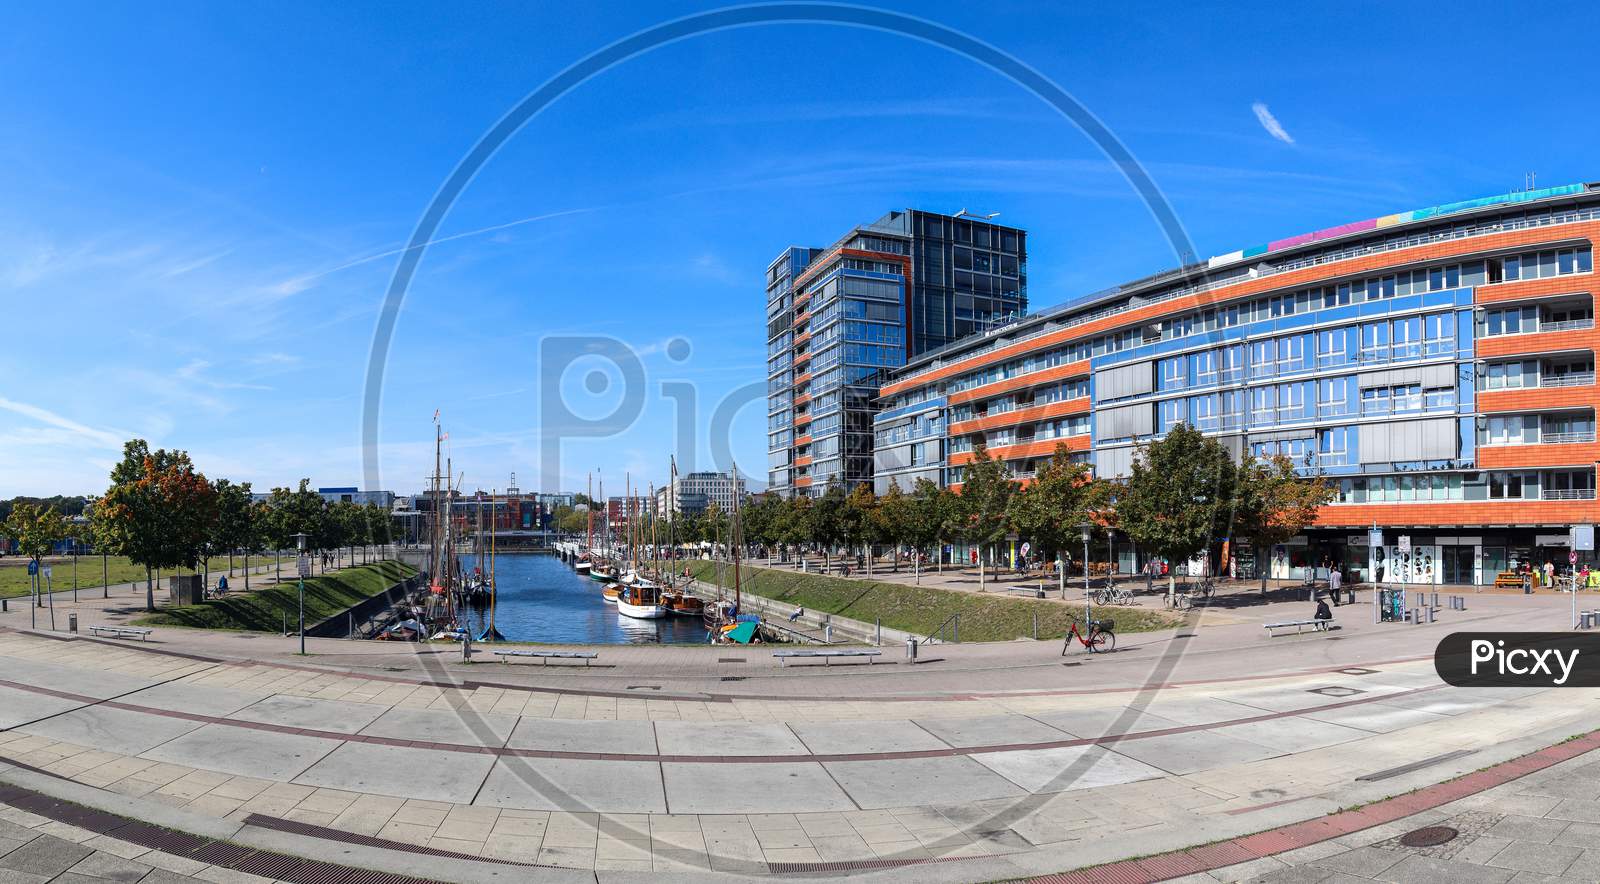 High Resolution Panorama Of The Port Of Kiel On A Sunny Day